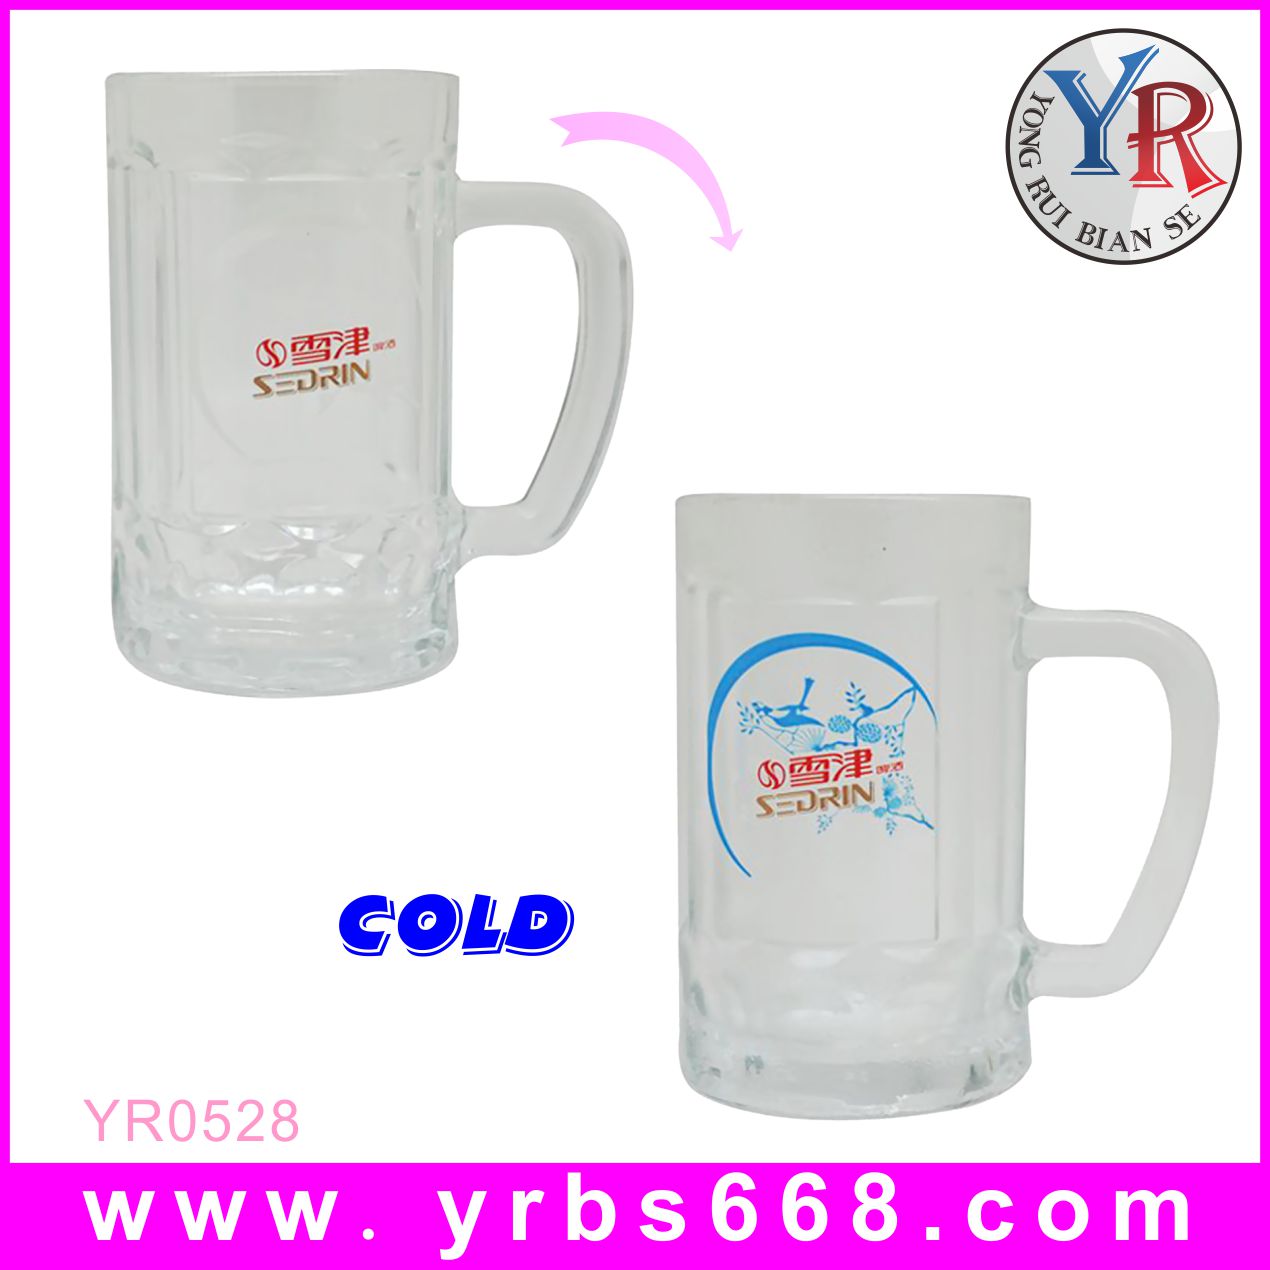 Glass Sedrin beer cold cup